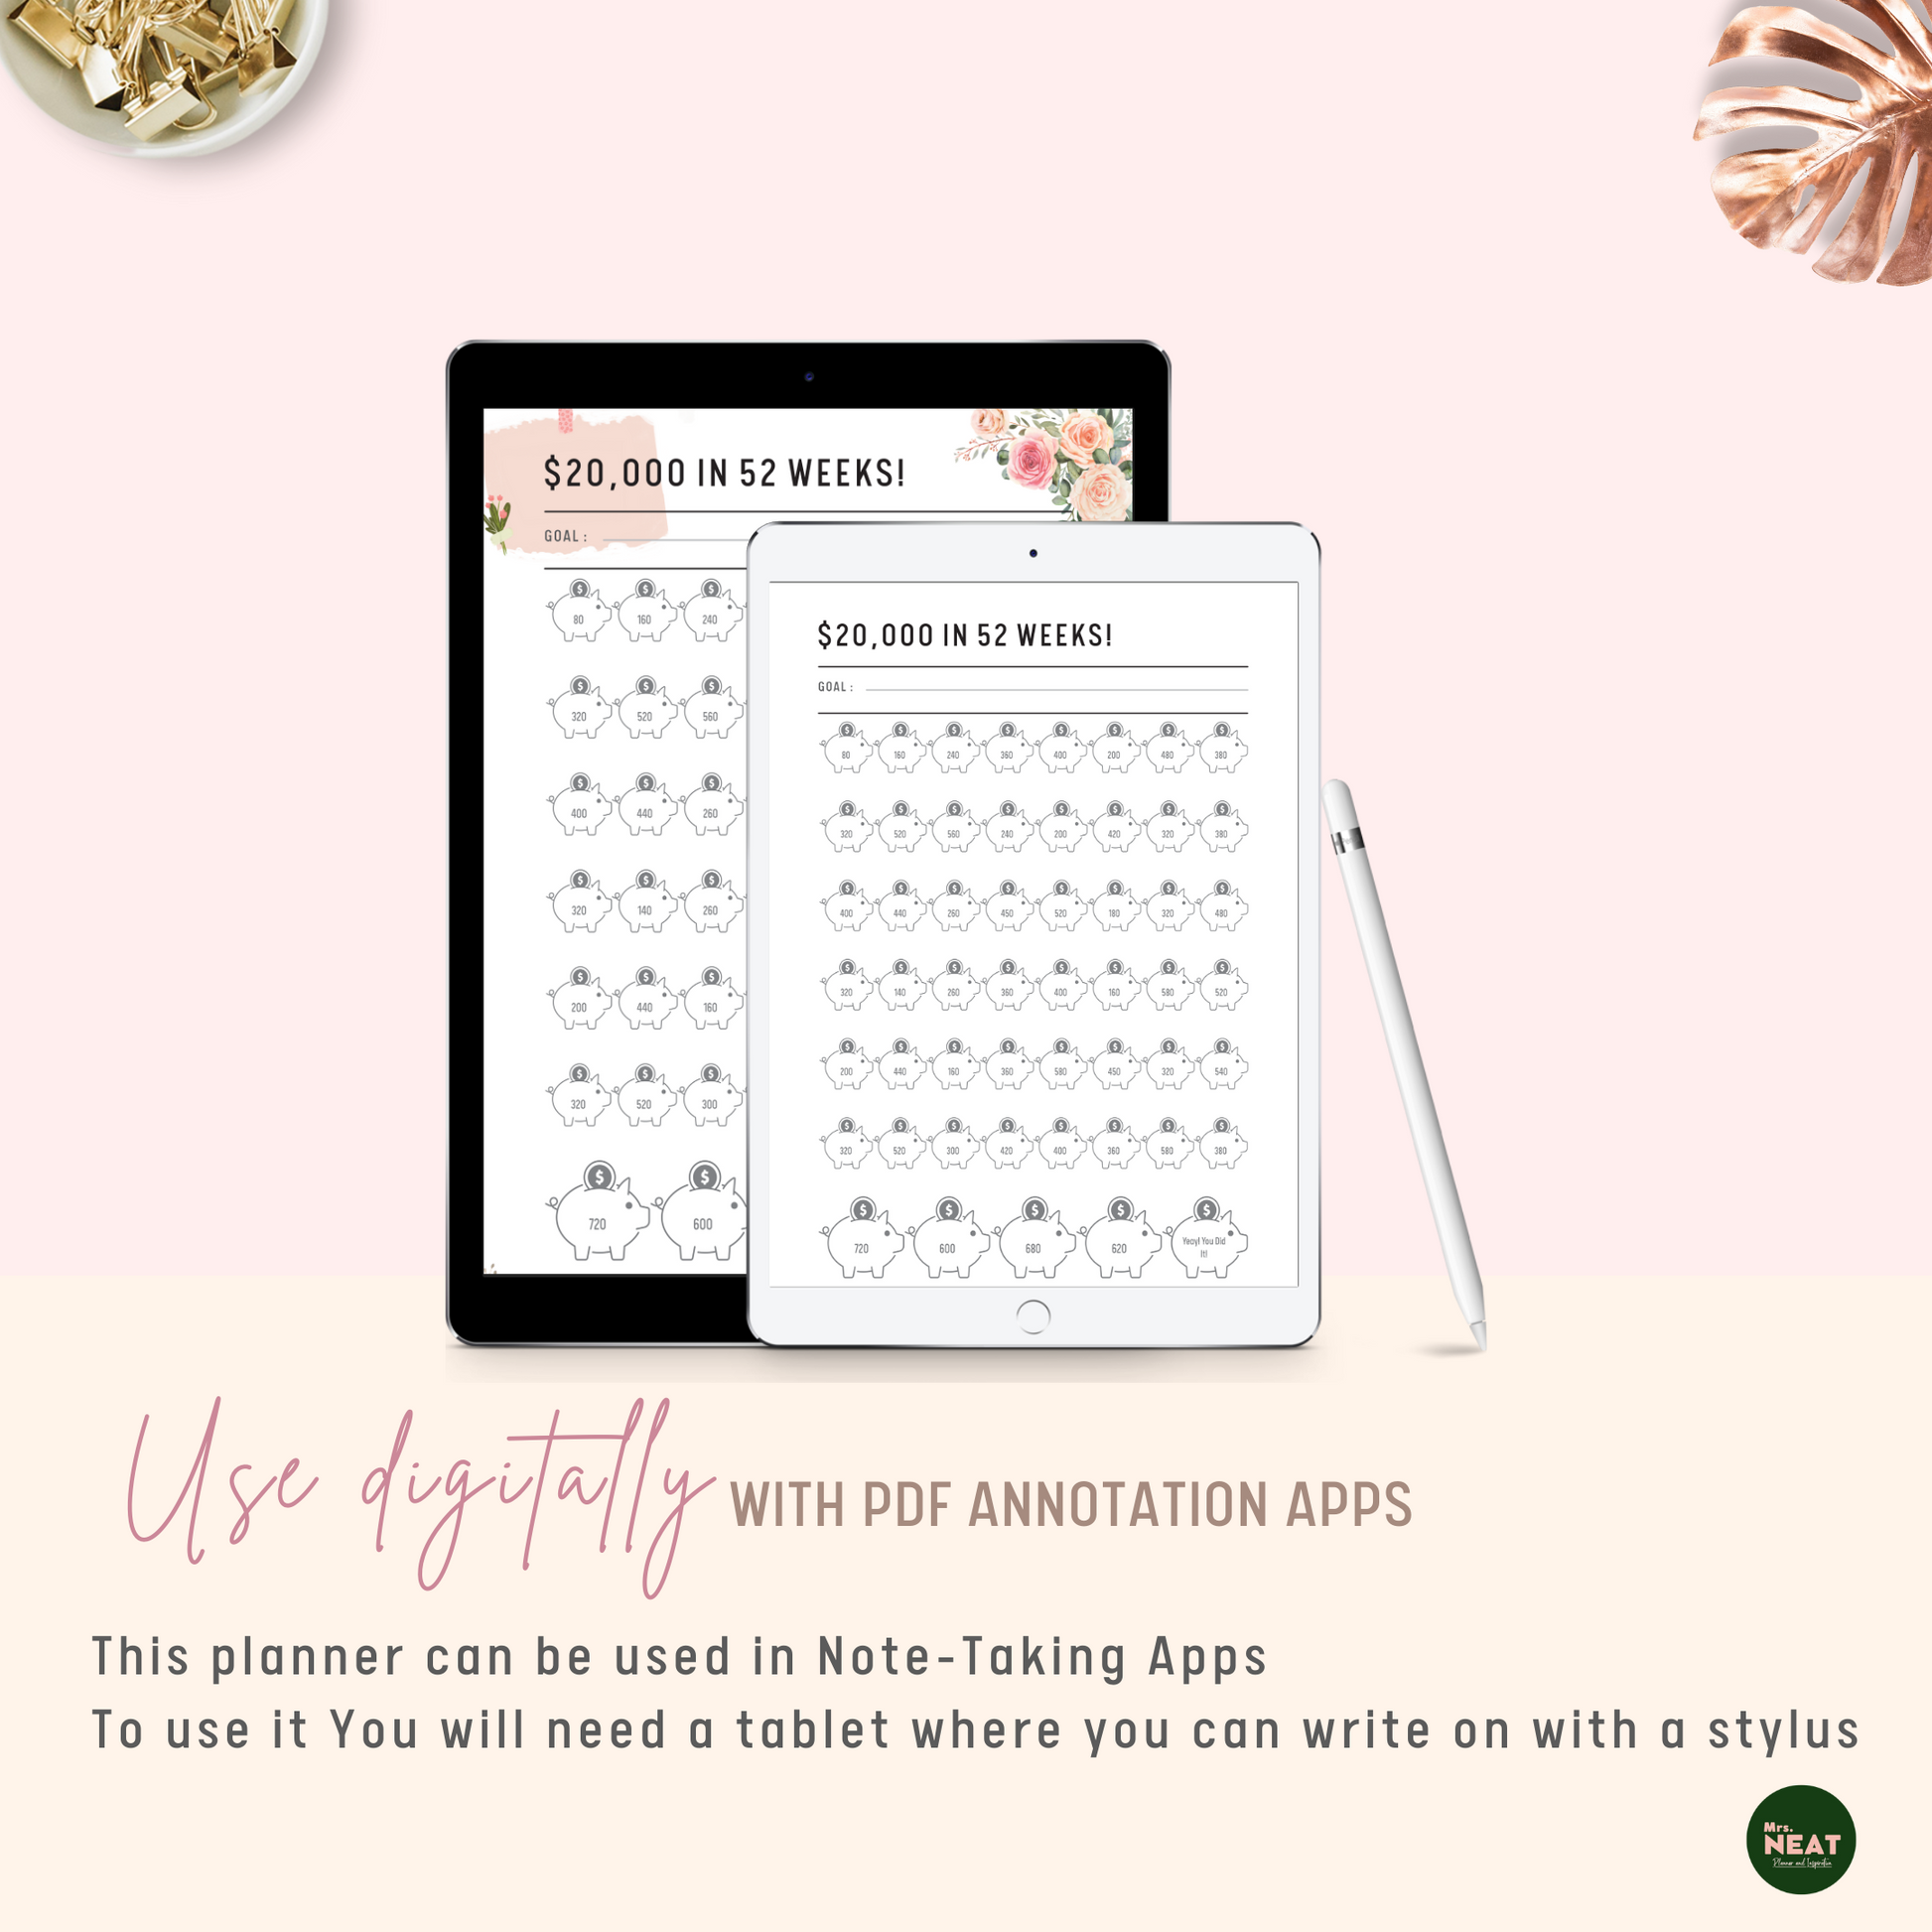 $20,000 Savings Challenge in 52 Weeks Planner can be use digitally with PDF Annotation Apps 